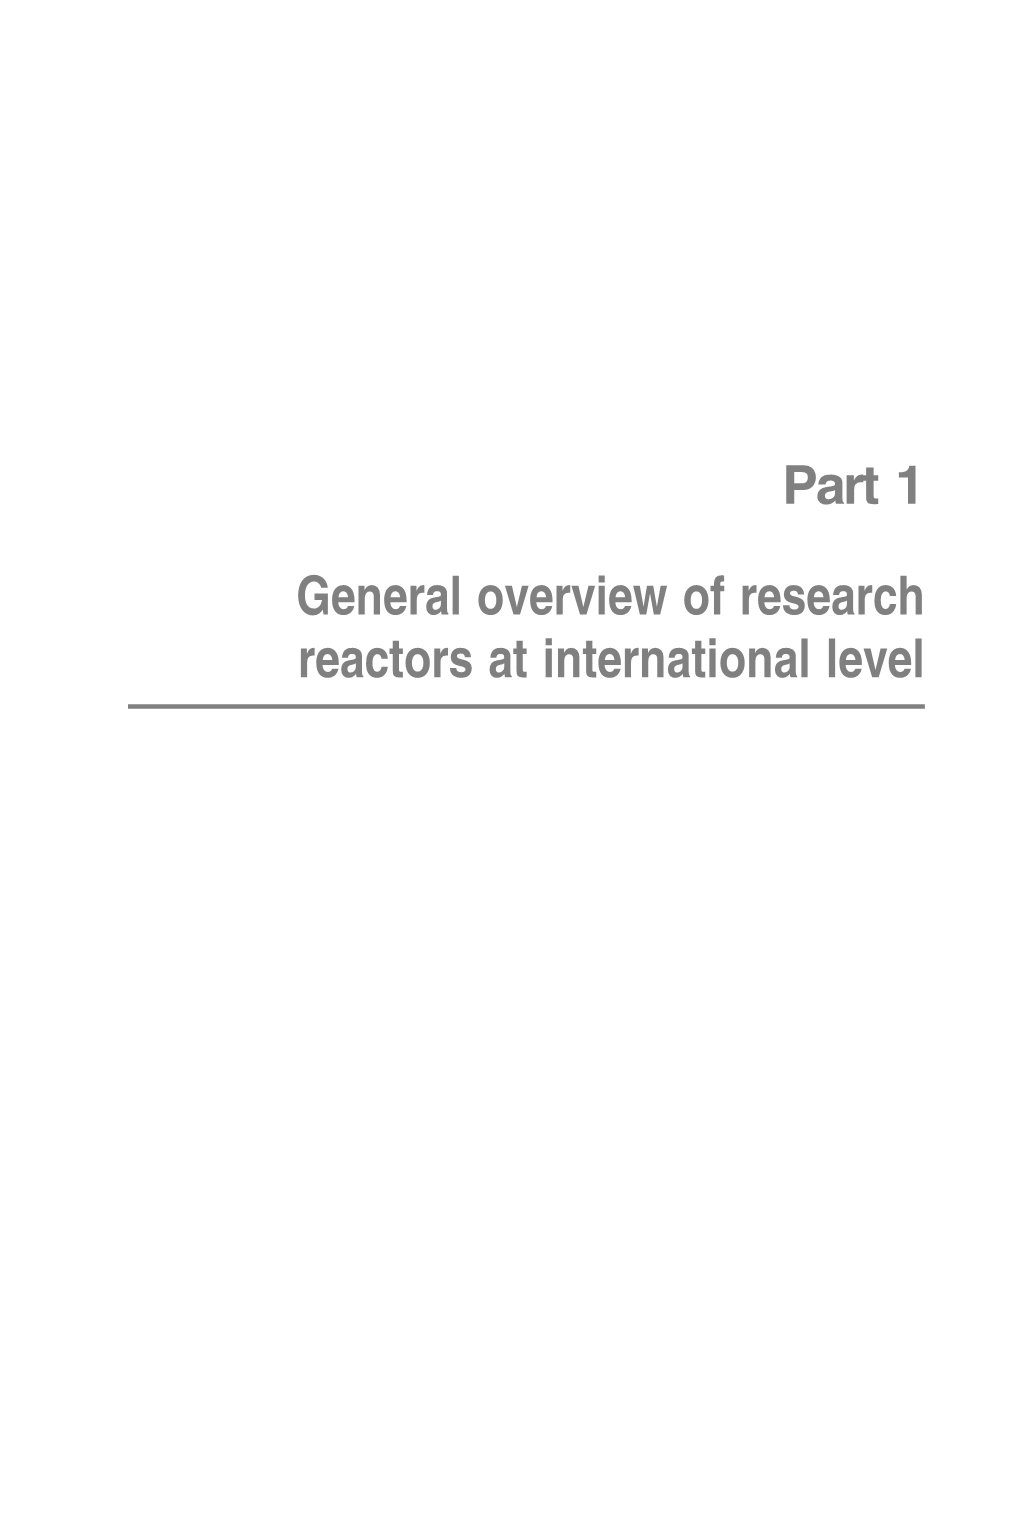 Chapter 2 the Different Types of Research Reactors, Overall Global Situation, Uses and Associated Risks